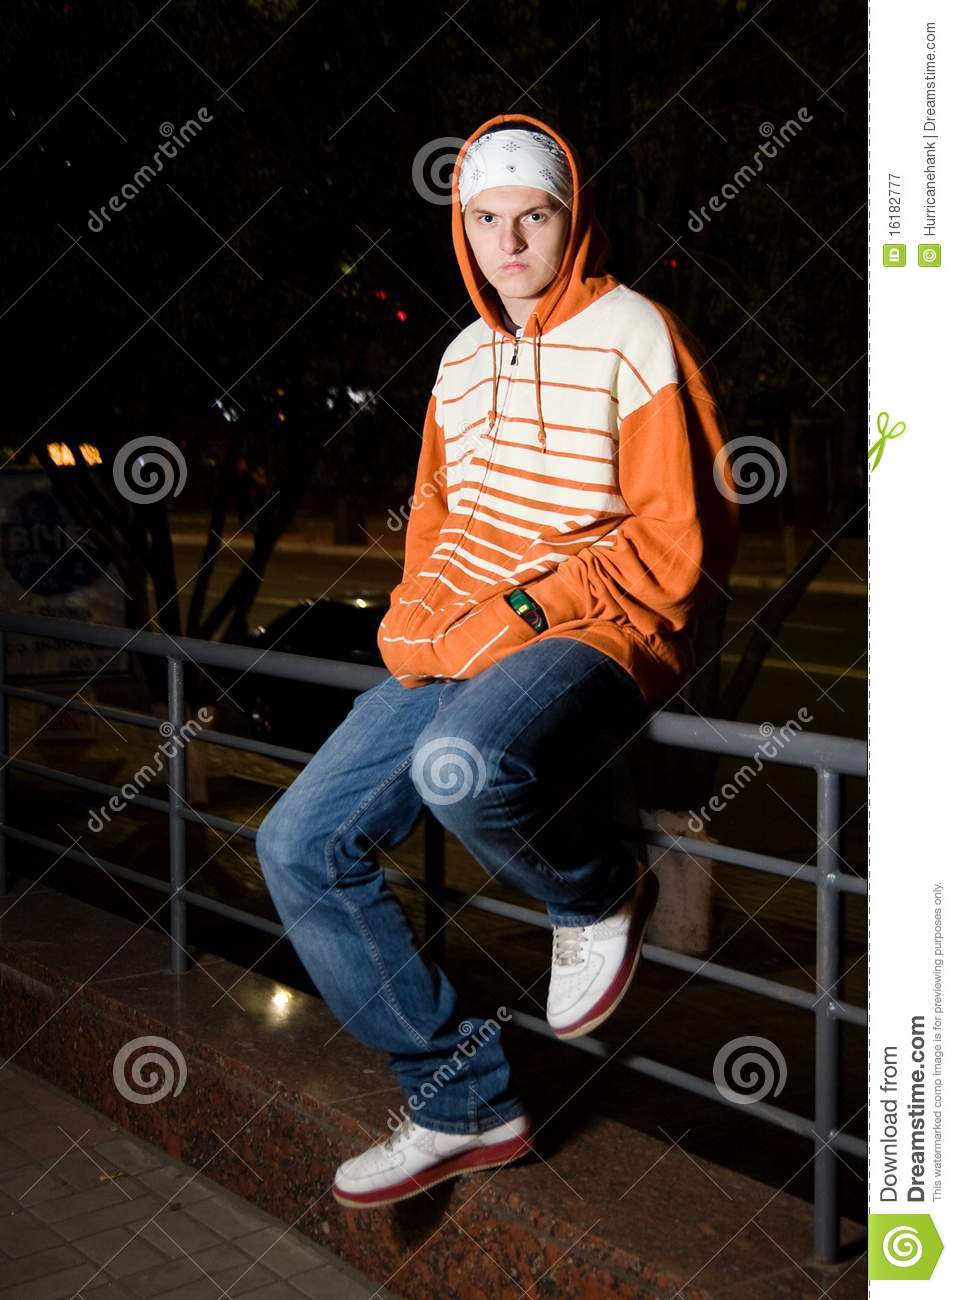 Young Drug Dealer On The Street Royalty Free Stock Photography   Image